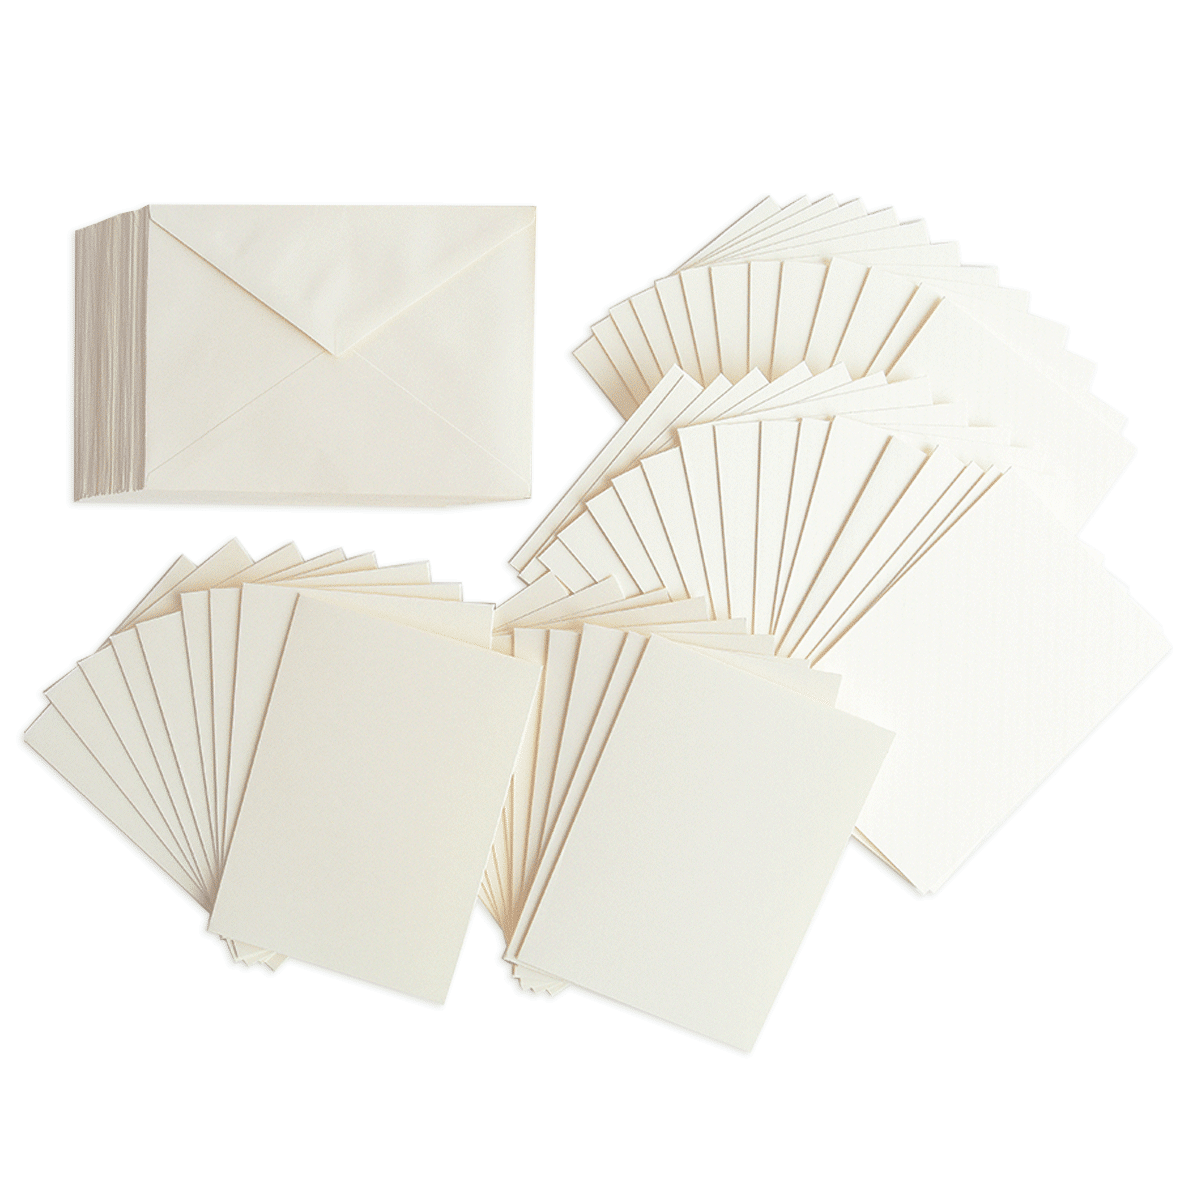 a bunch of white cards and envelopes on a green background.